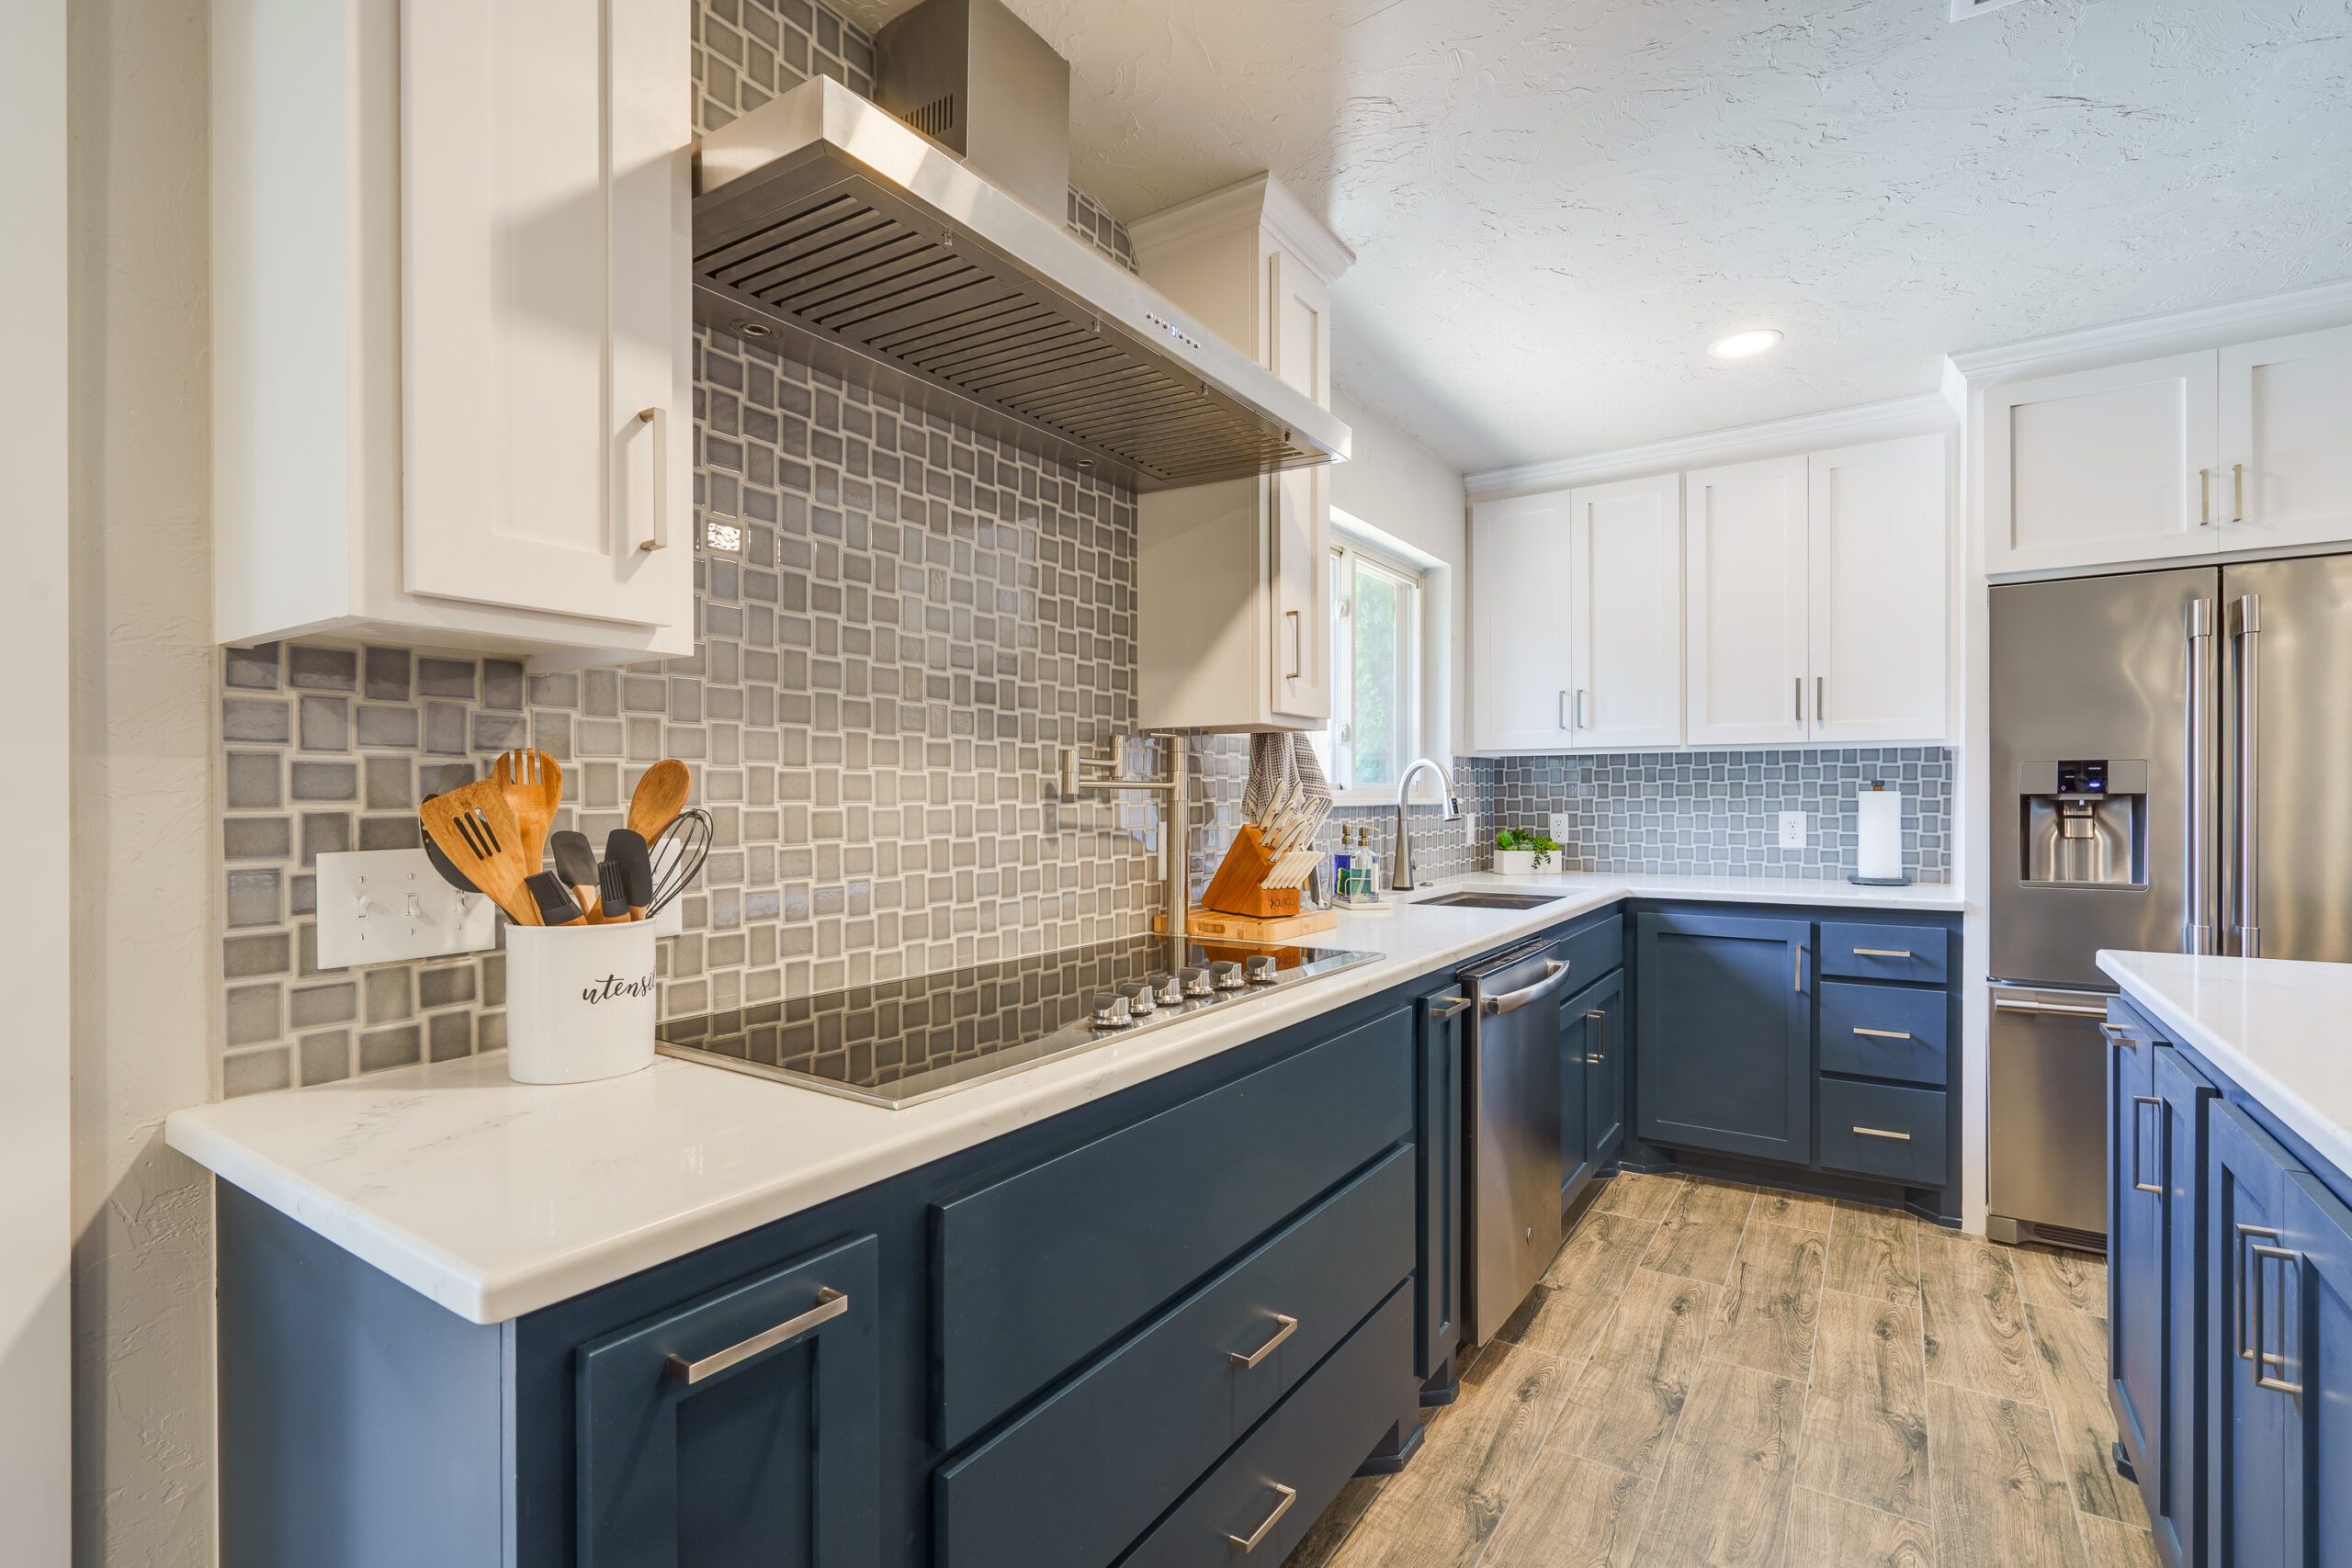 Where in Nichols Hills can I find kitchen remodeling experts?